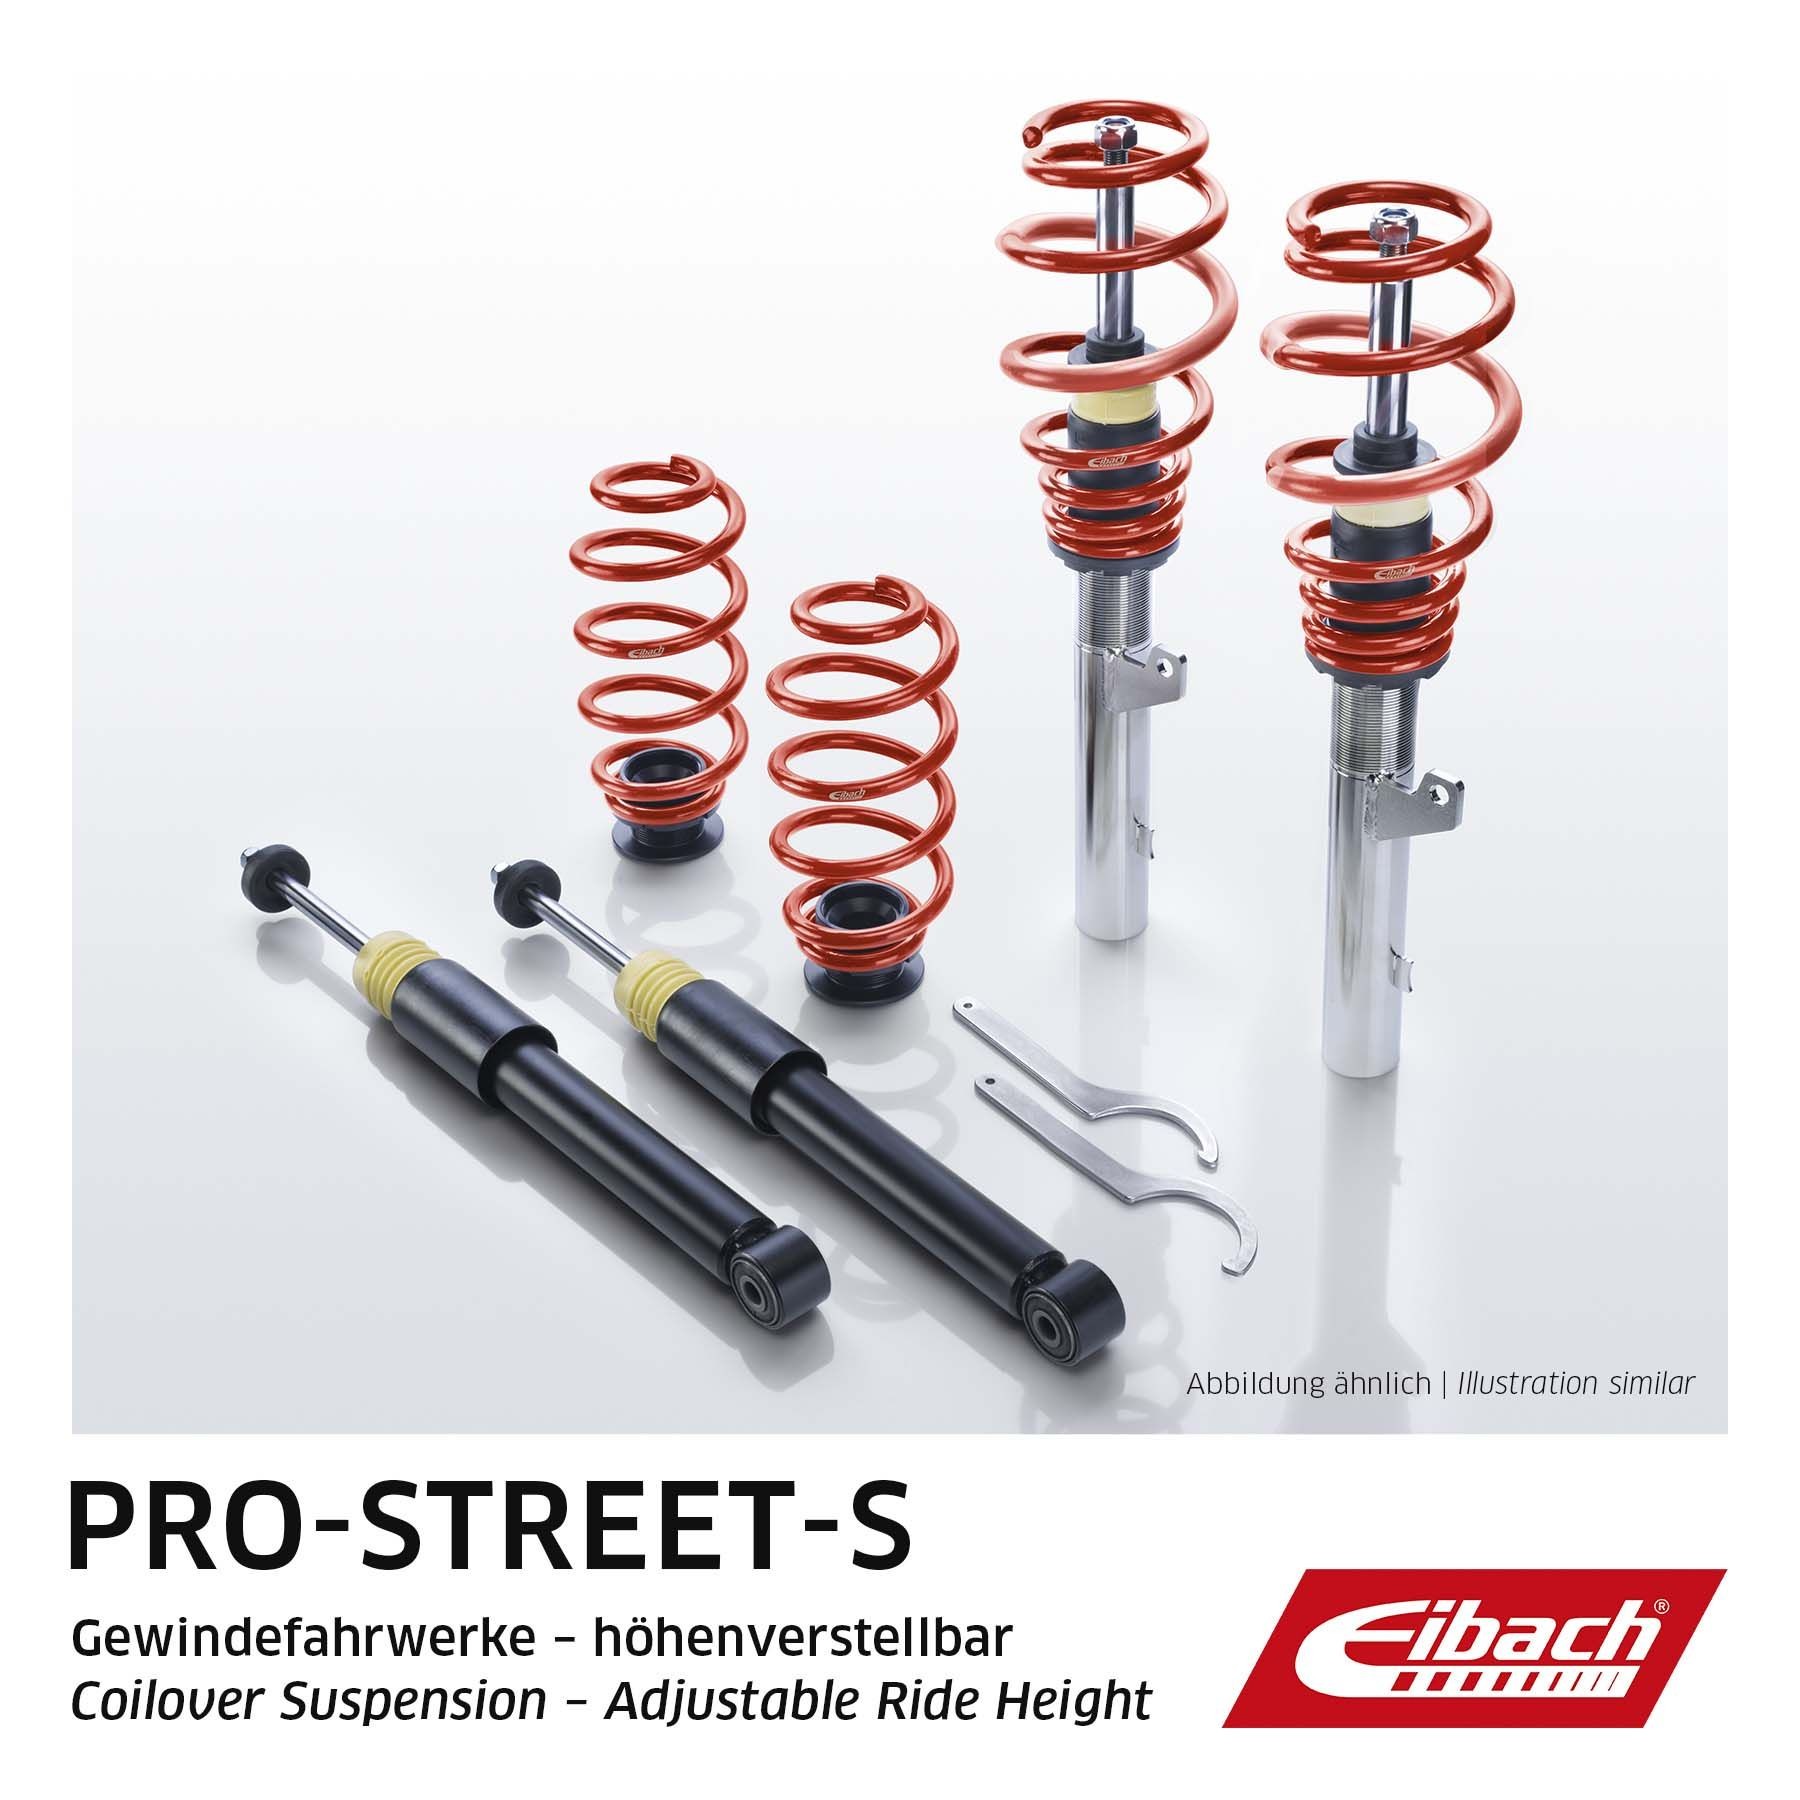 EIBACH PSS65-20-046-02-22 TOYOTA Suspension kit, coil springs / shock absorbers in original quality